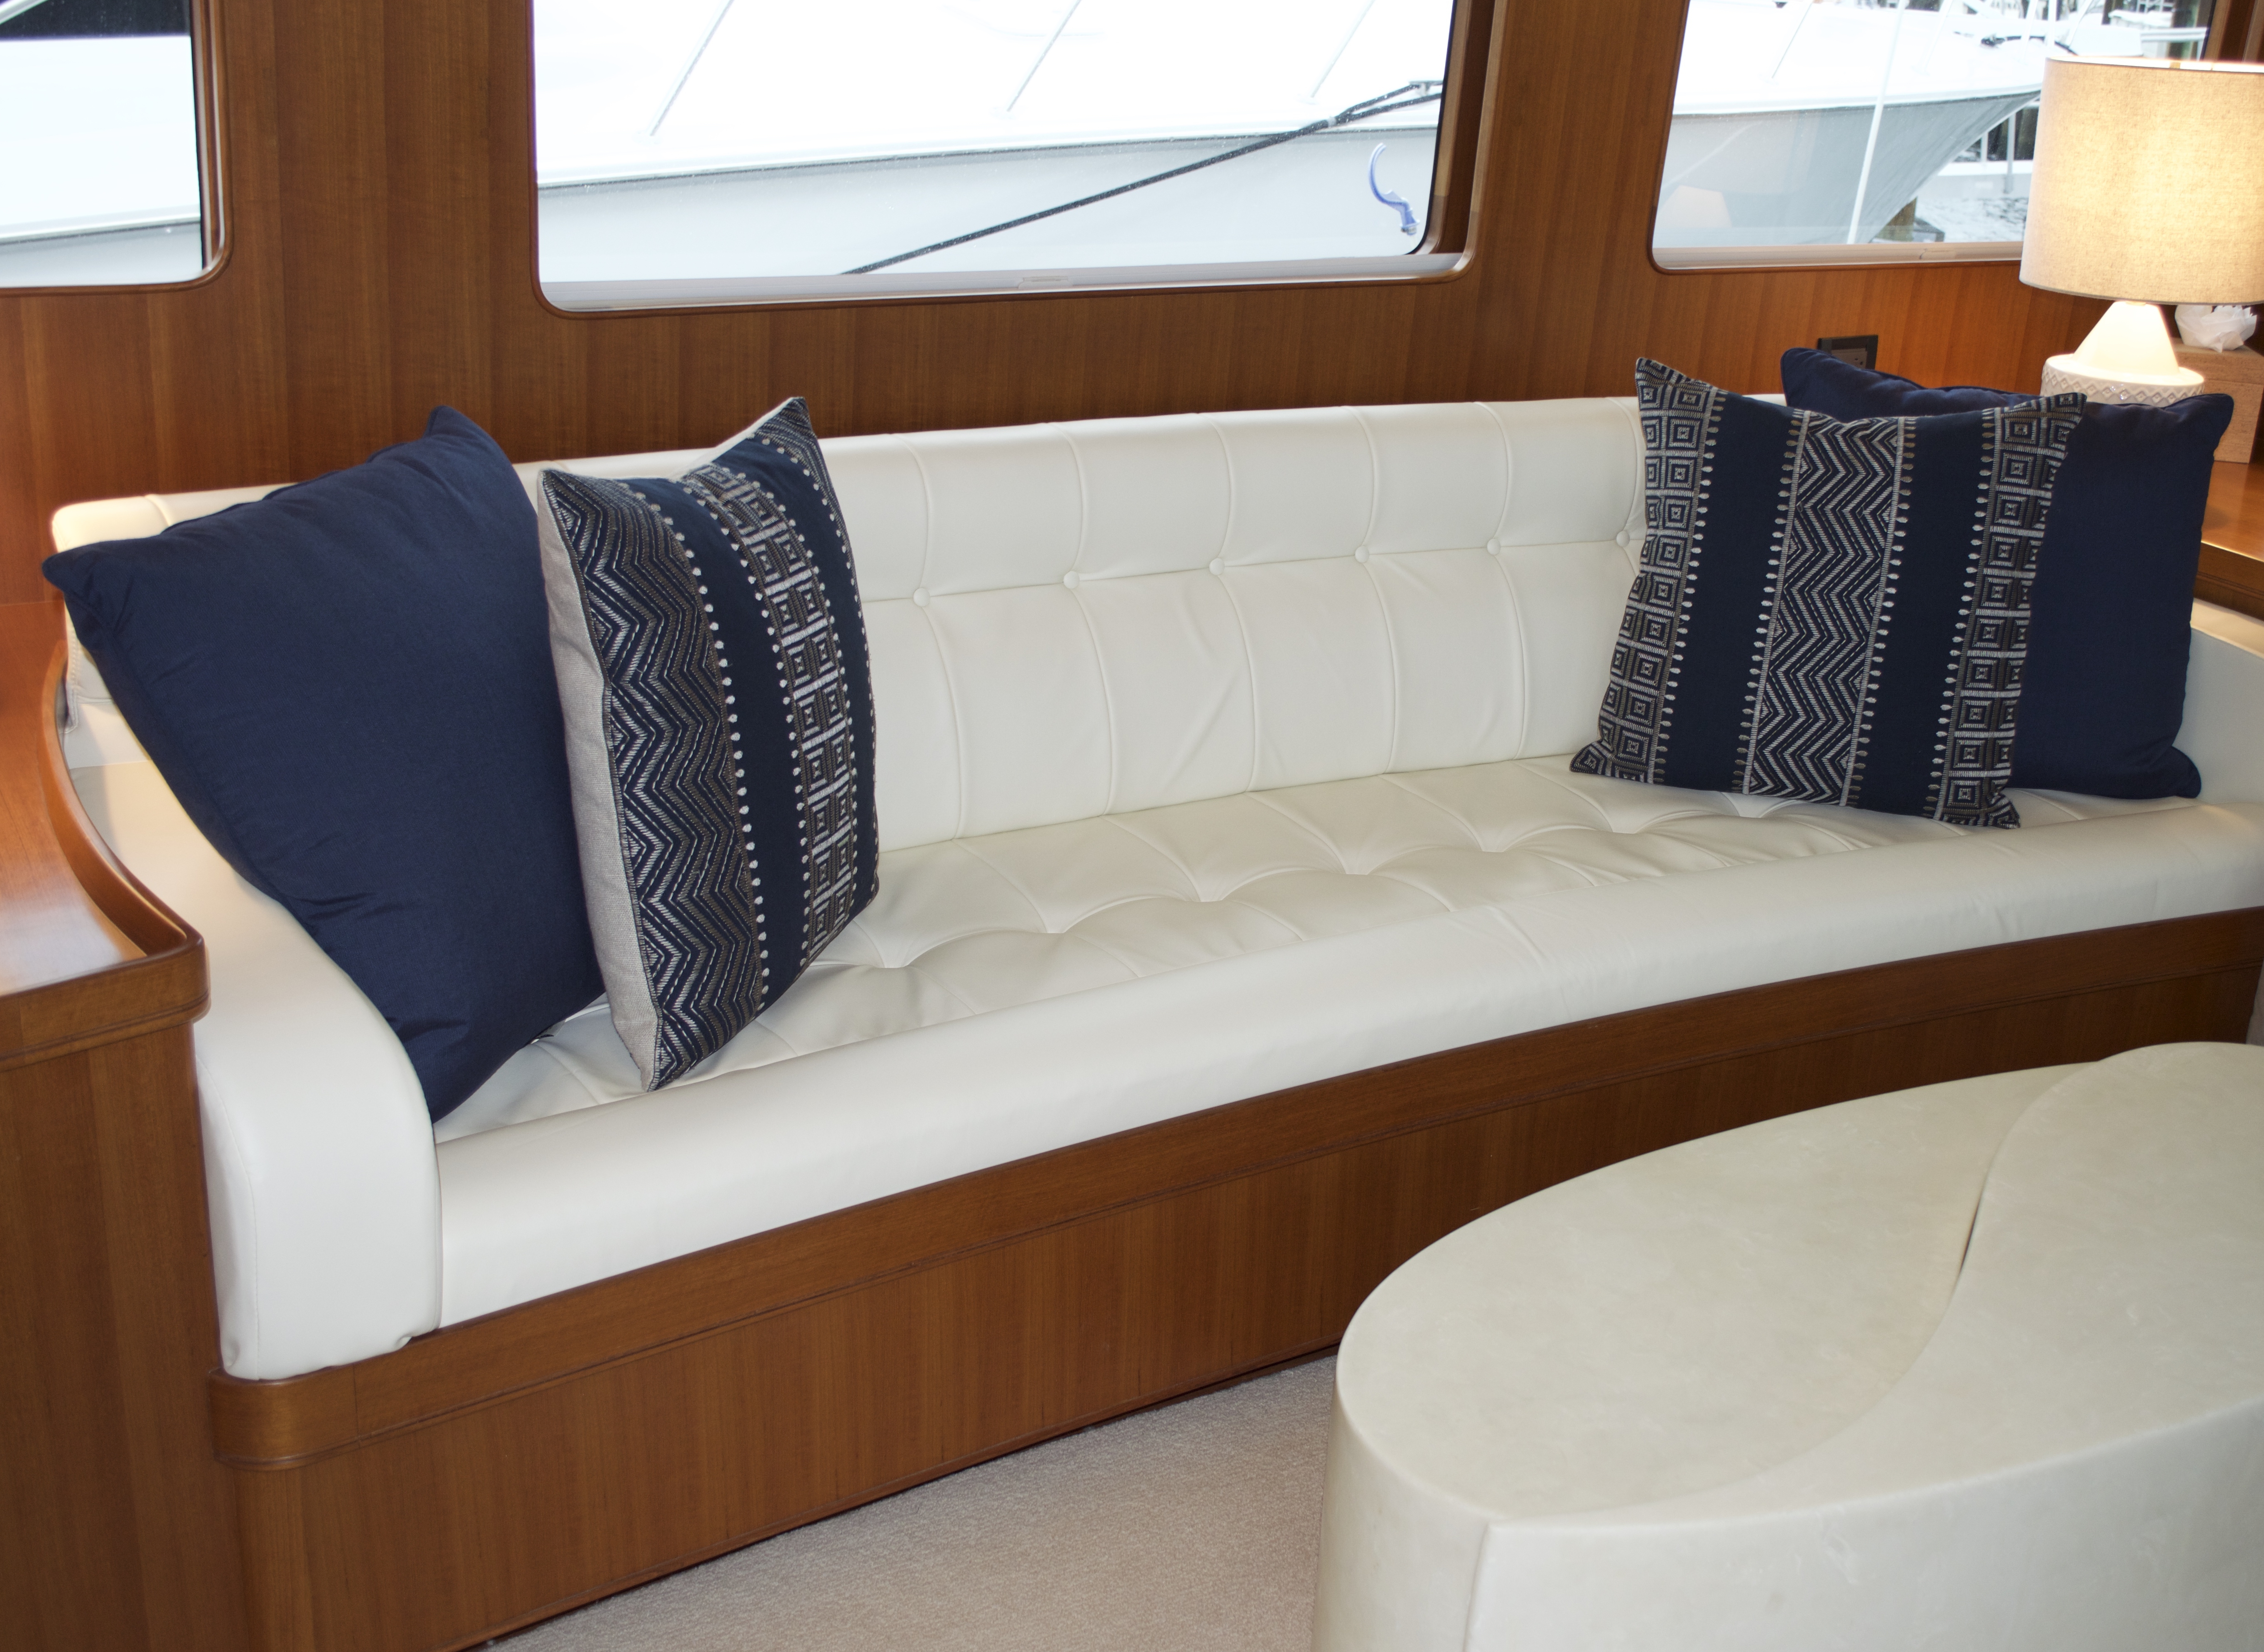 The Almighty Boat Cushion: A guide to boat cushion fabrication